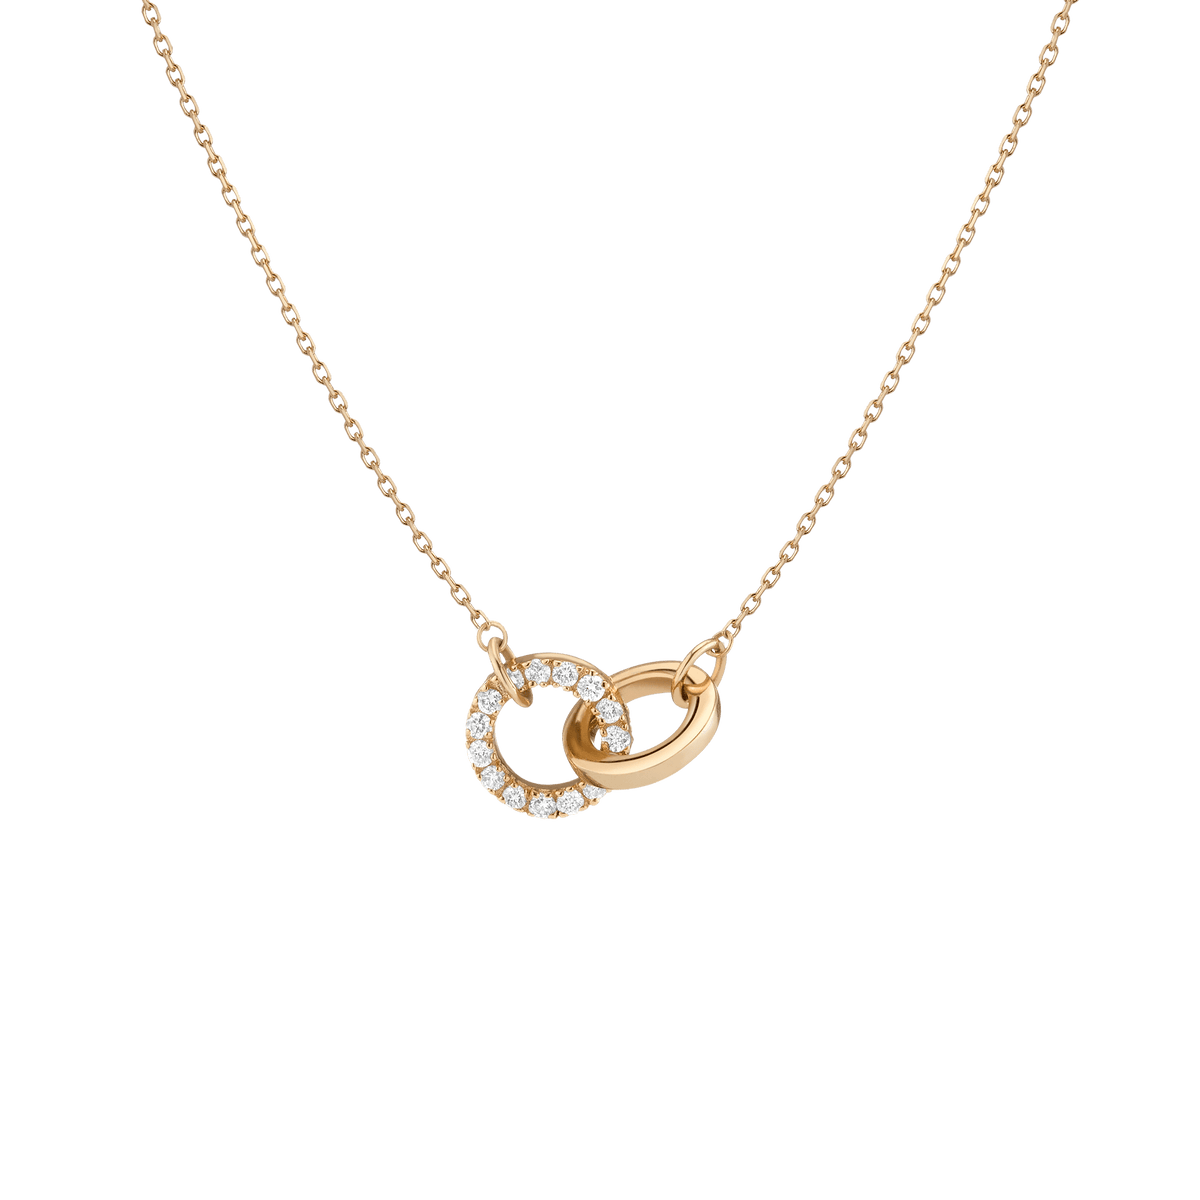 Diamond Connection Necklace in Yellow, Rose or White Gold